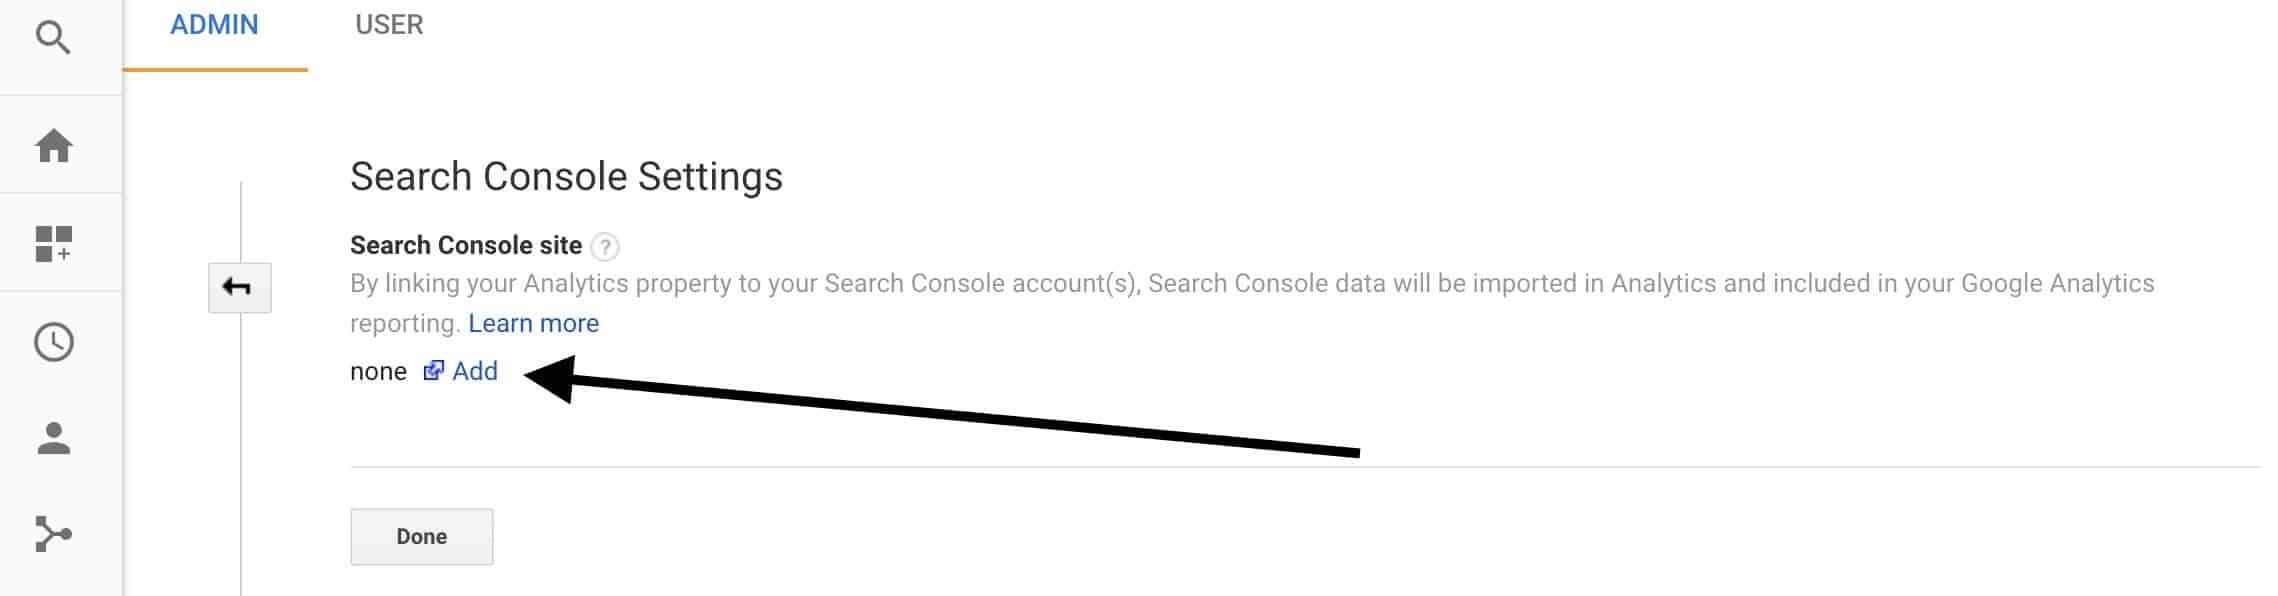 link-google-analytics-to-search-console_Add-min